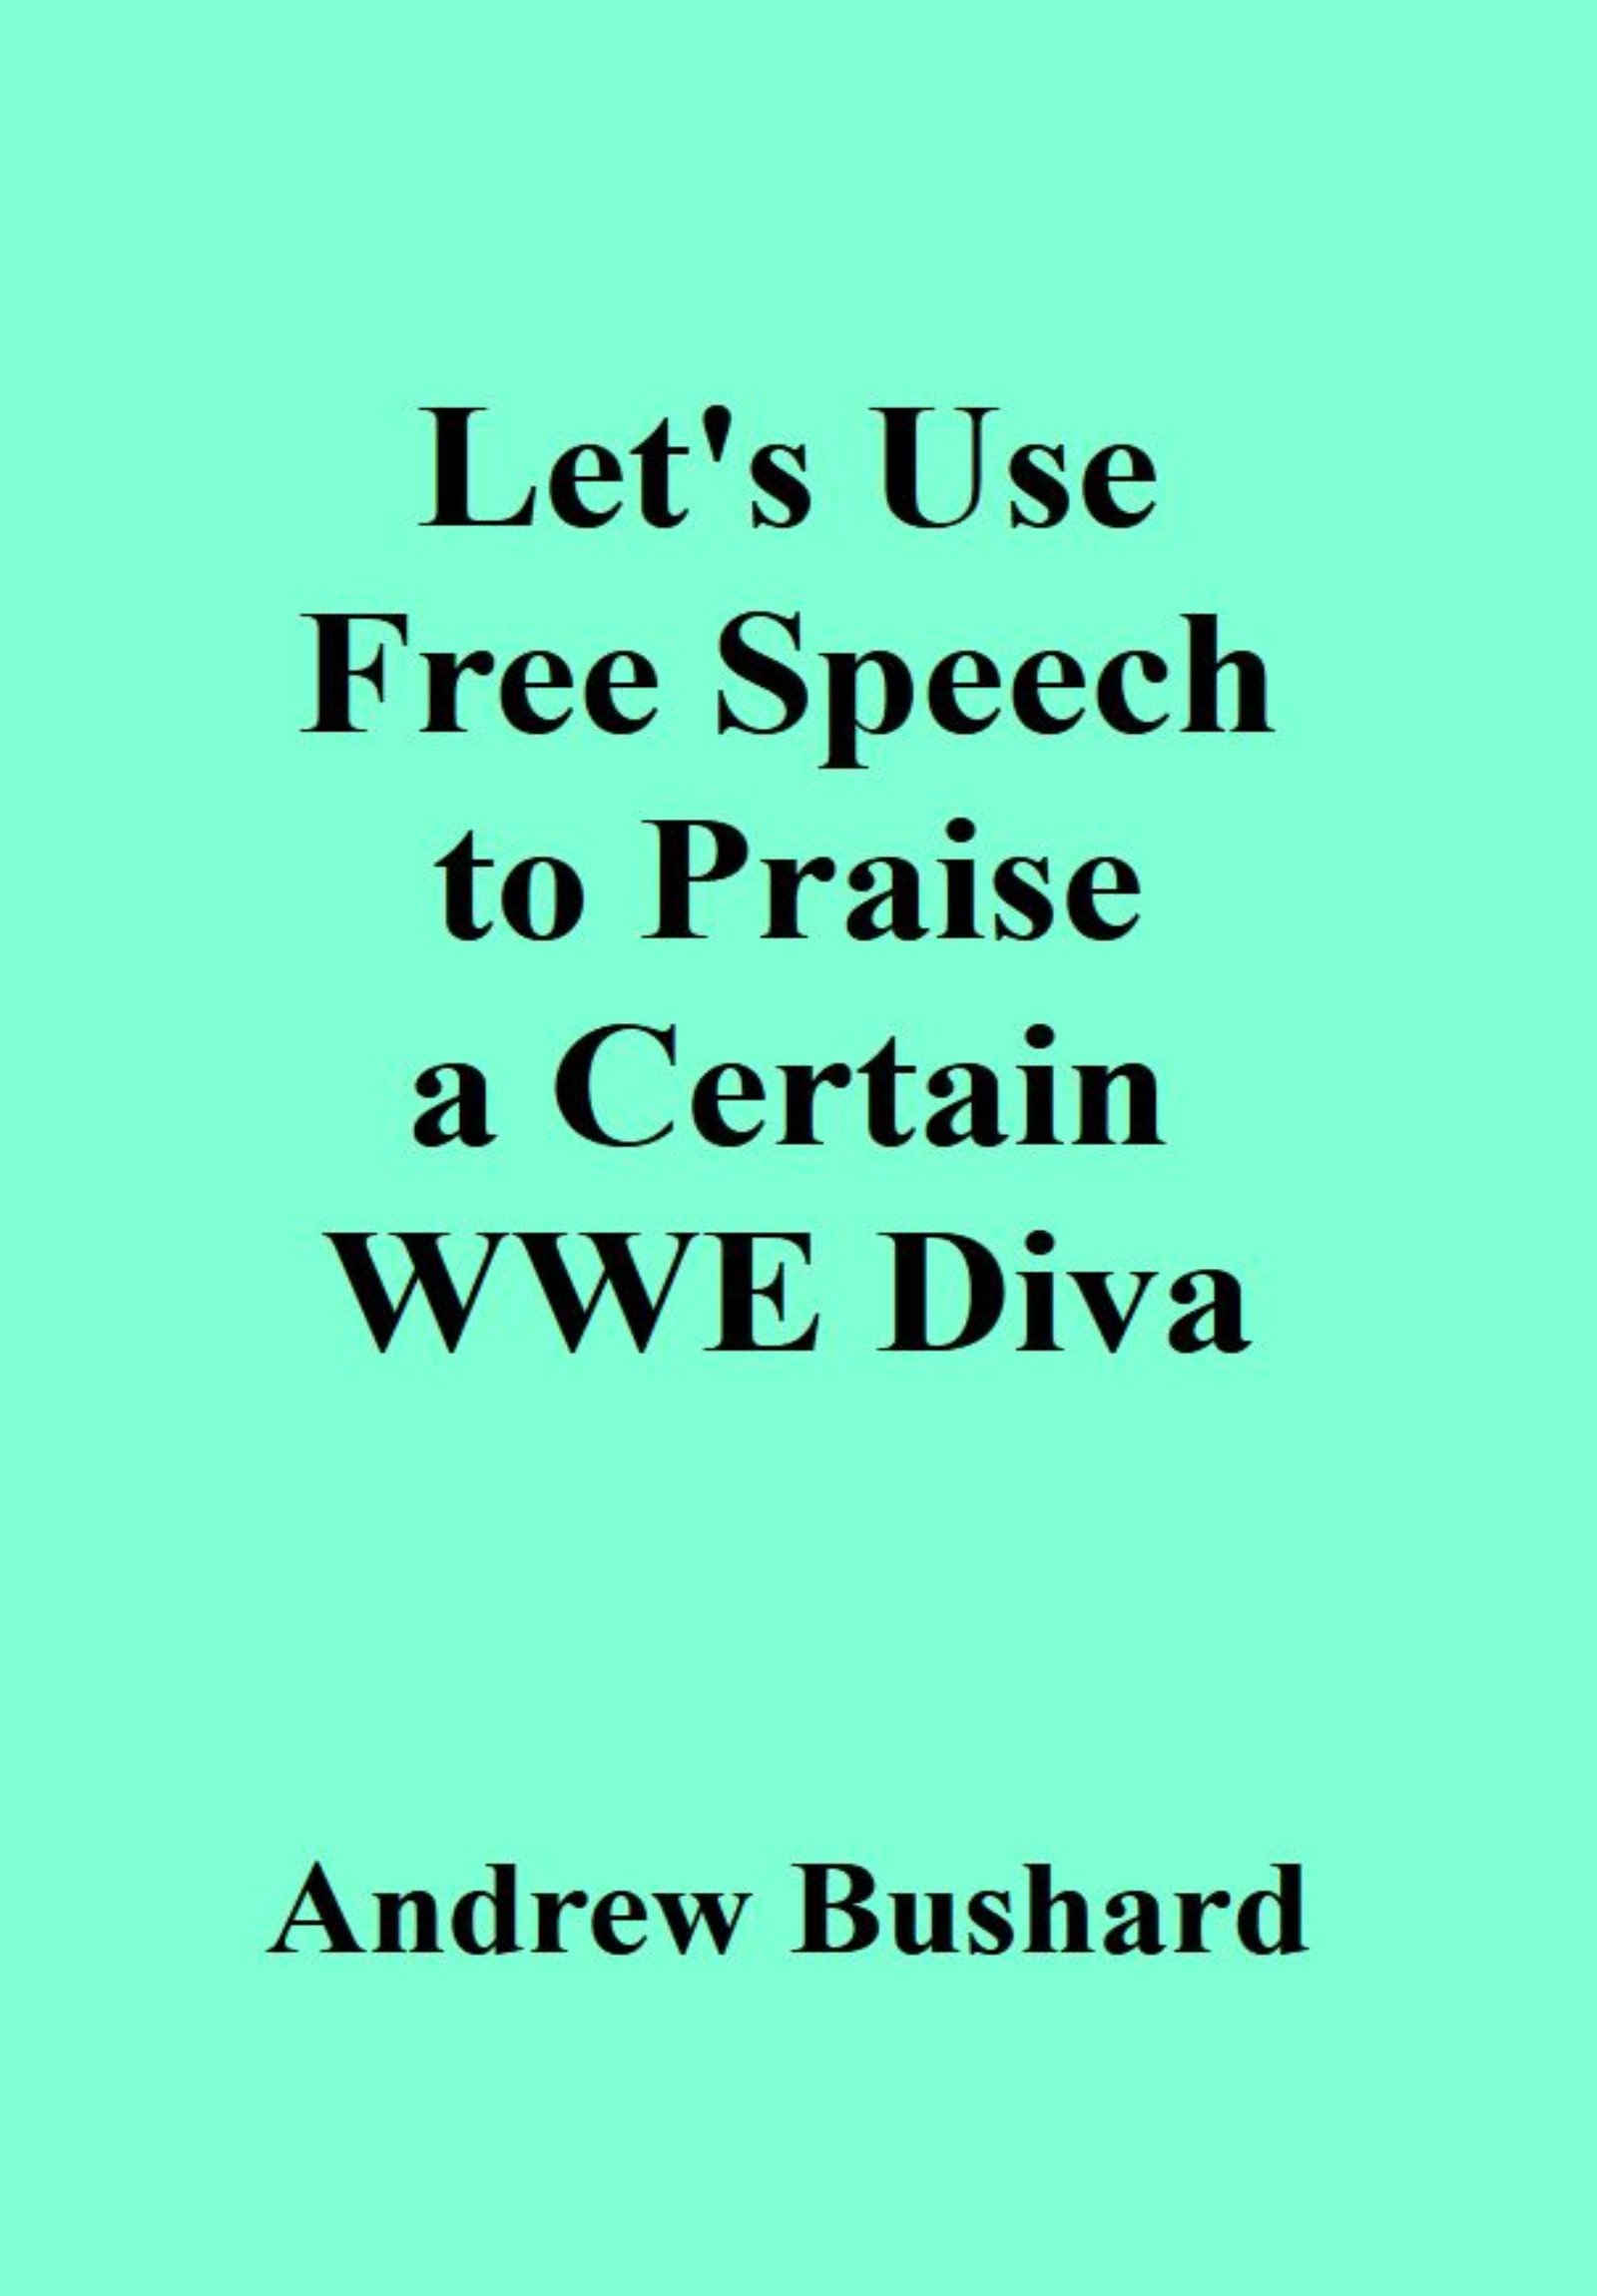 Let's Use Free Speech to Praise a Certain WWE Diva